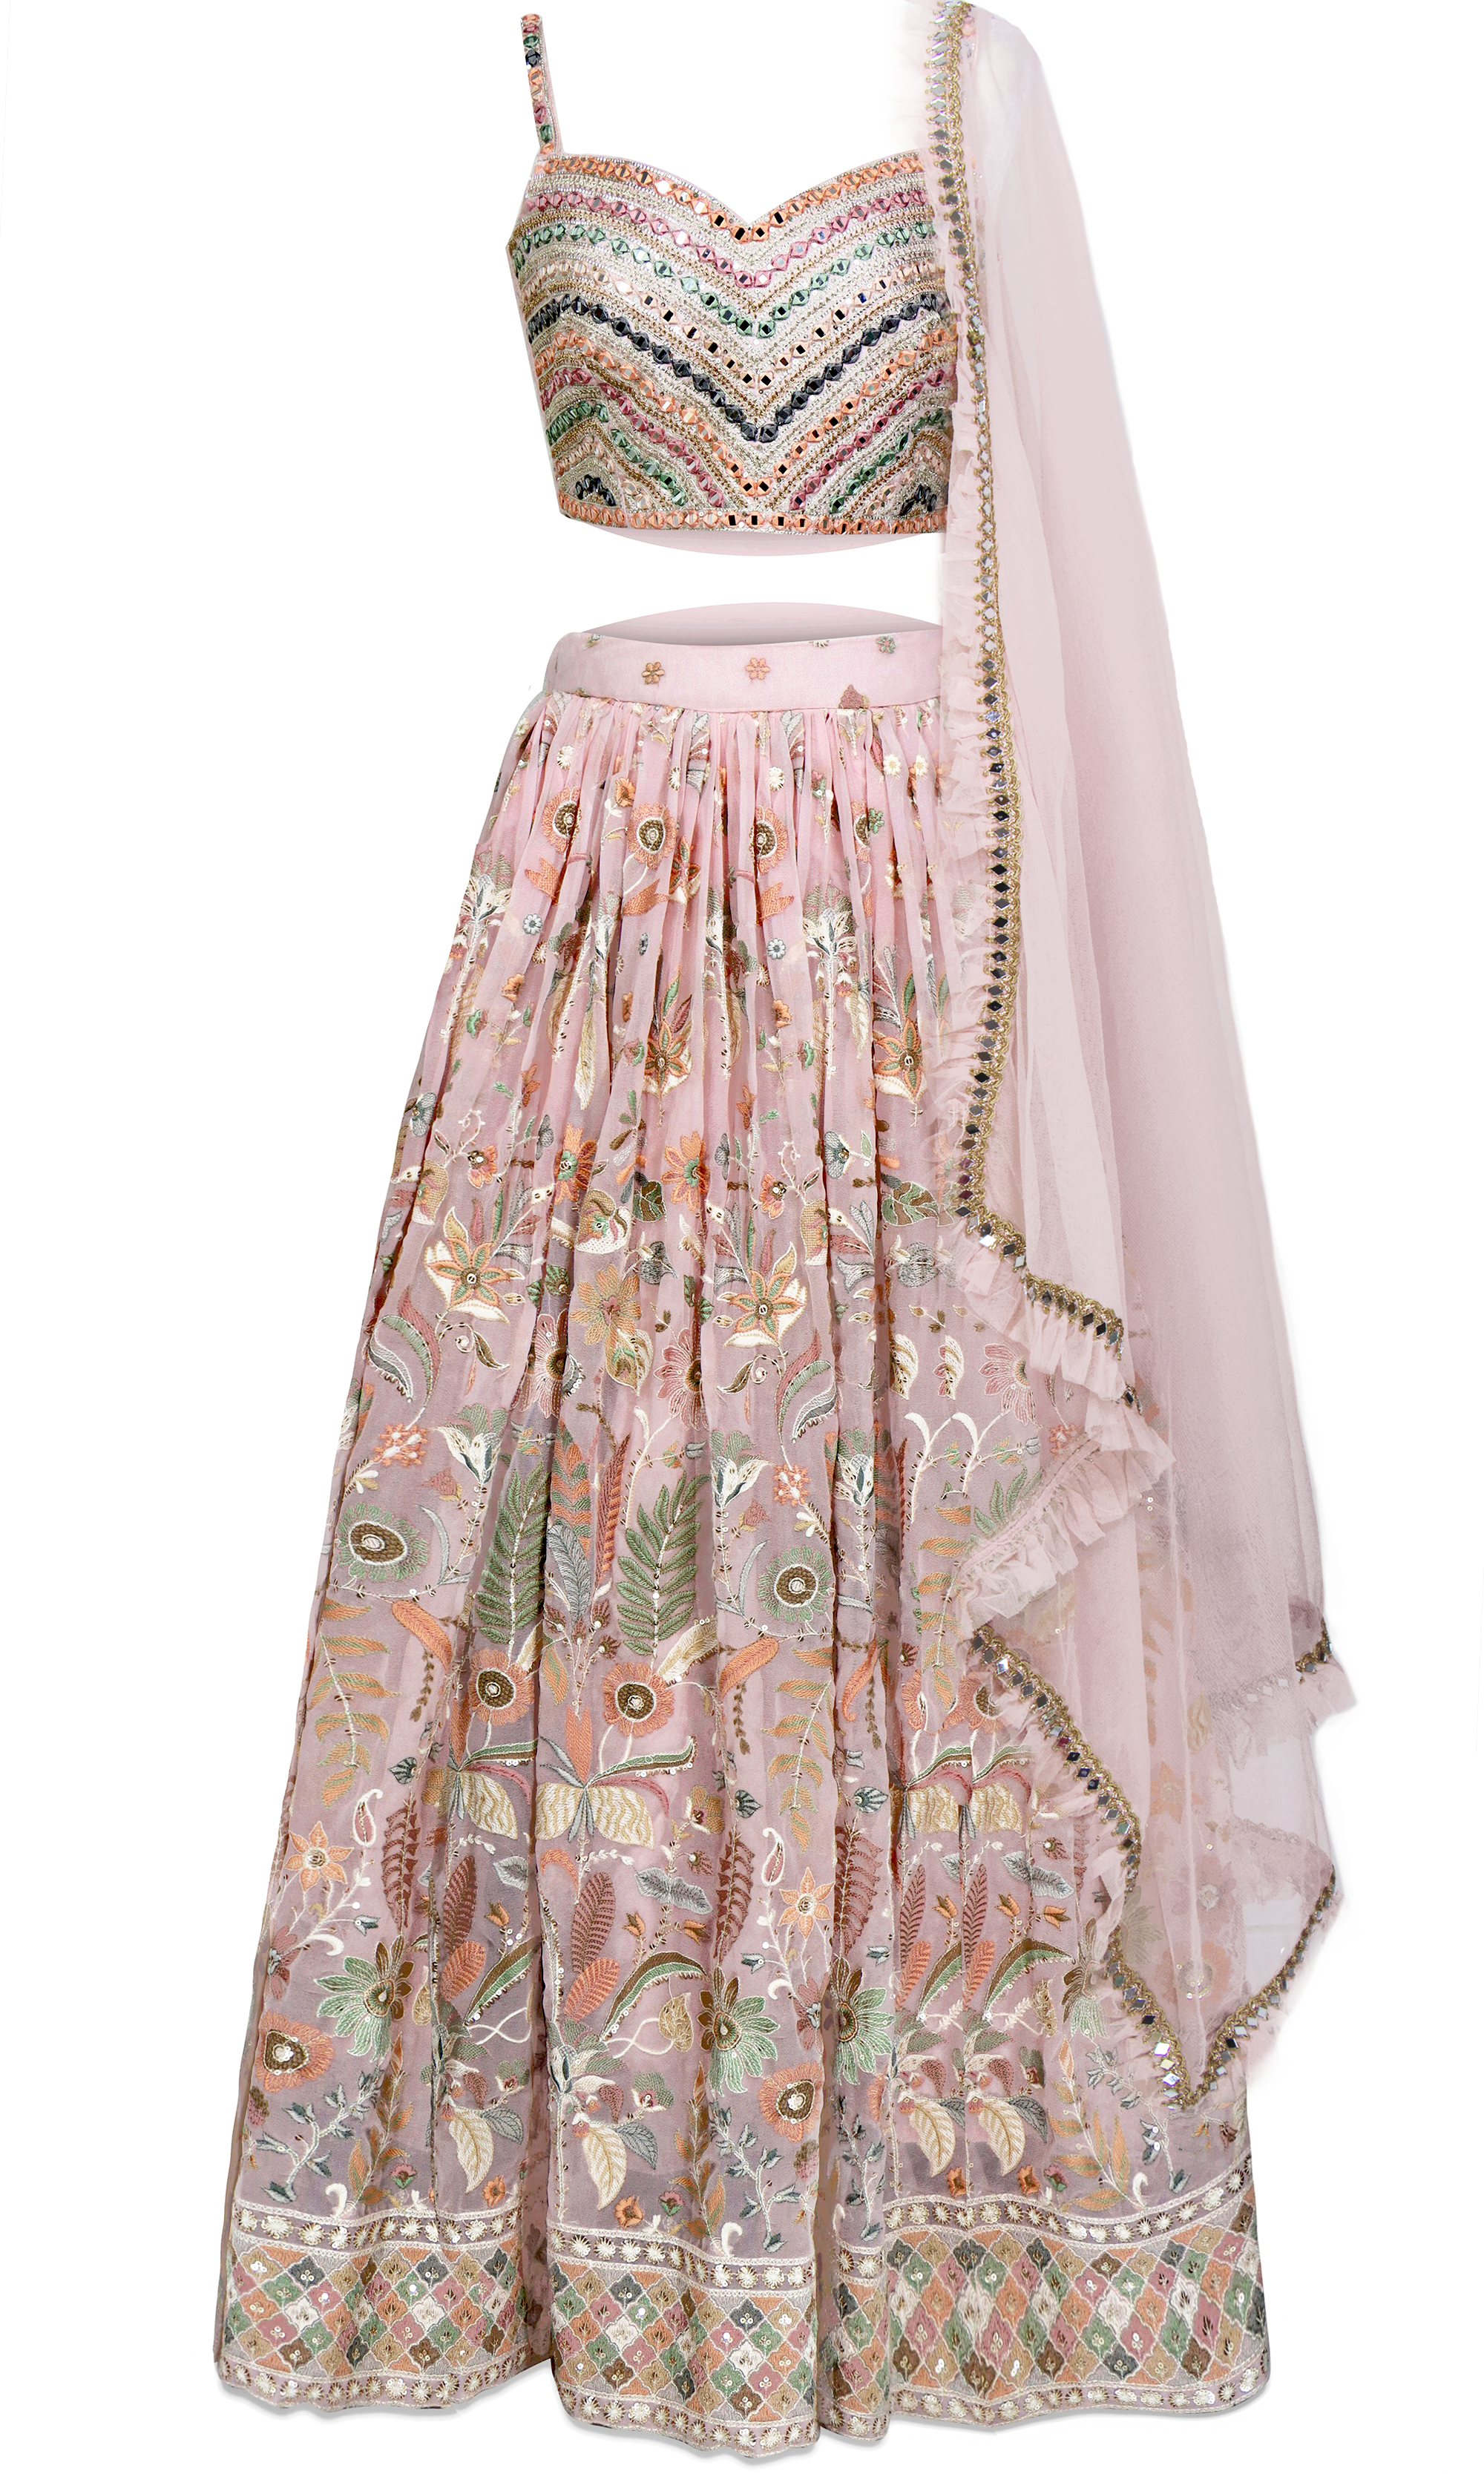 Multicolored resham and sequins Georgette Onion pink lehenga, matching crop top. 